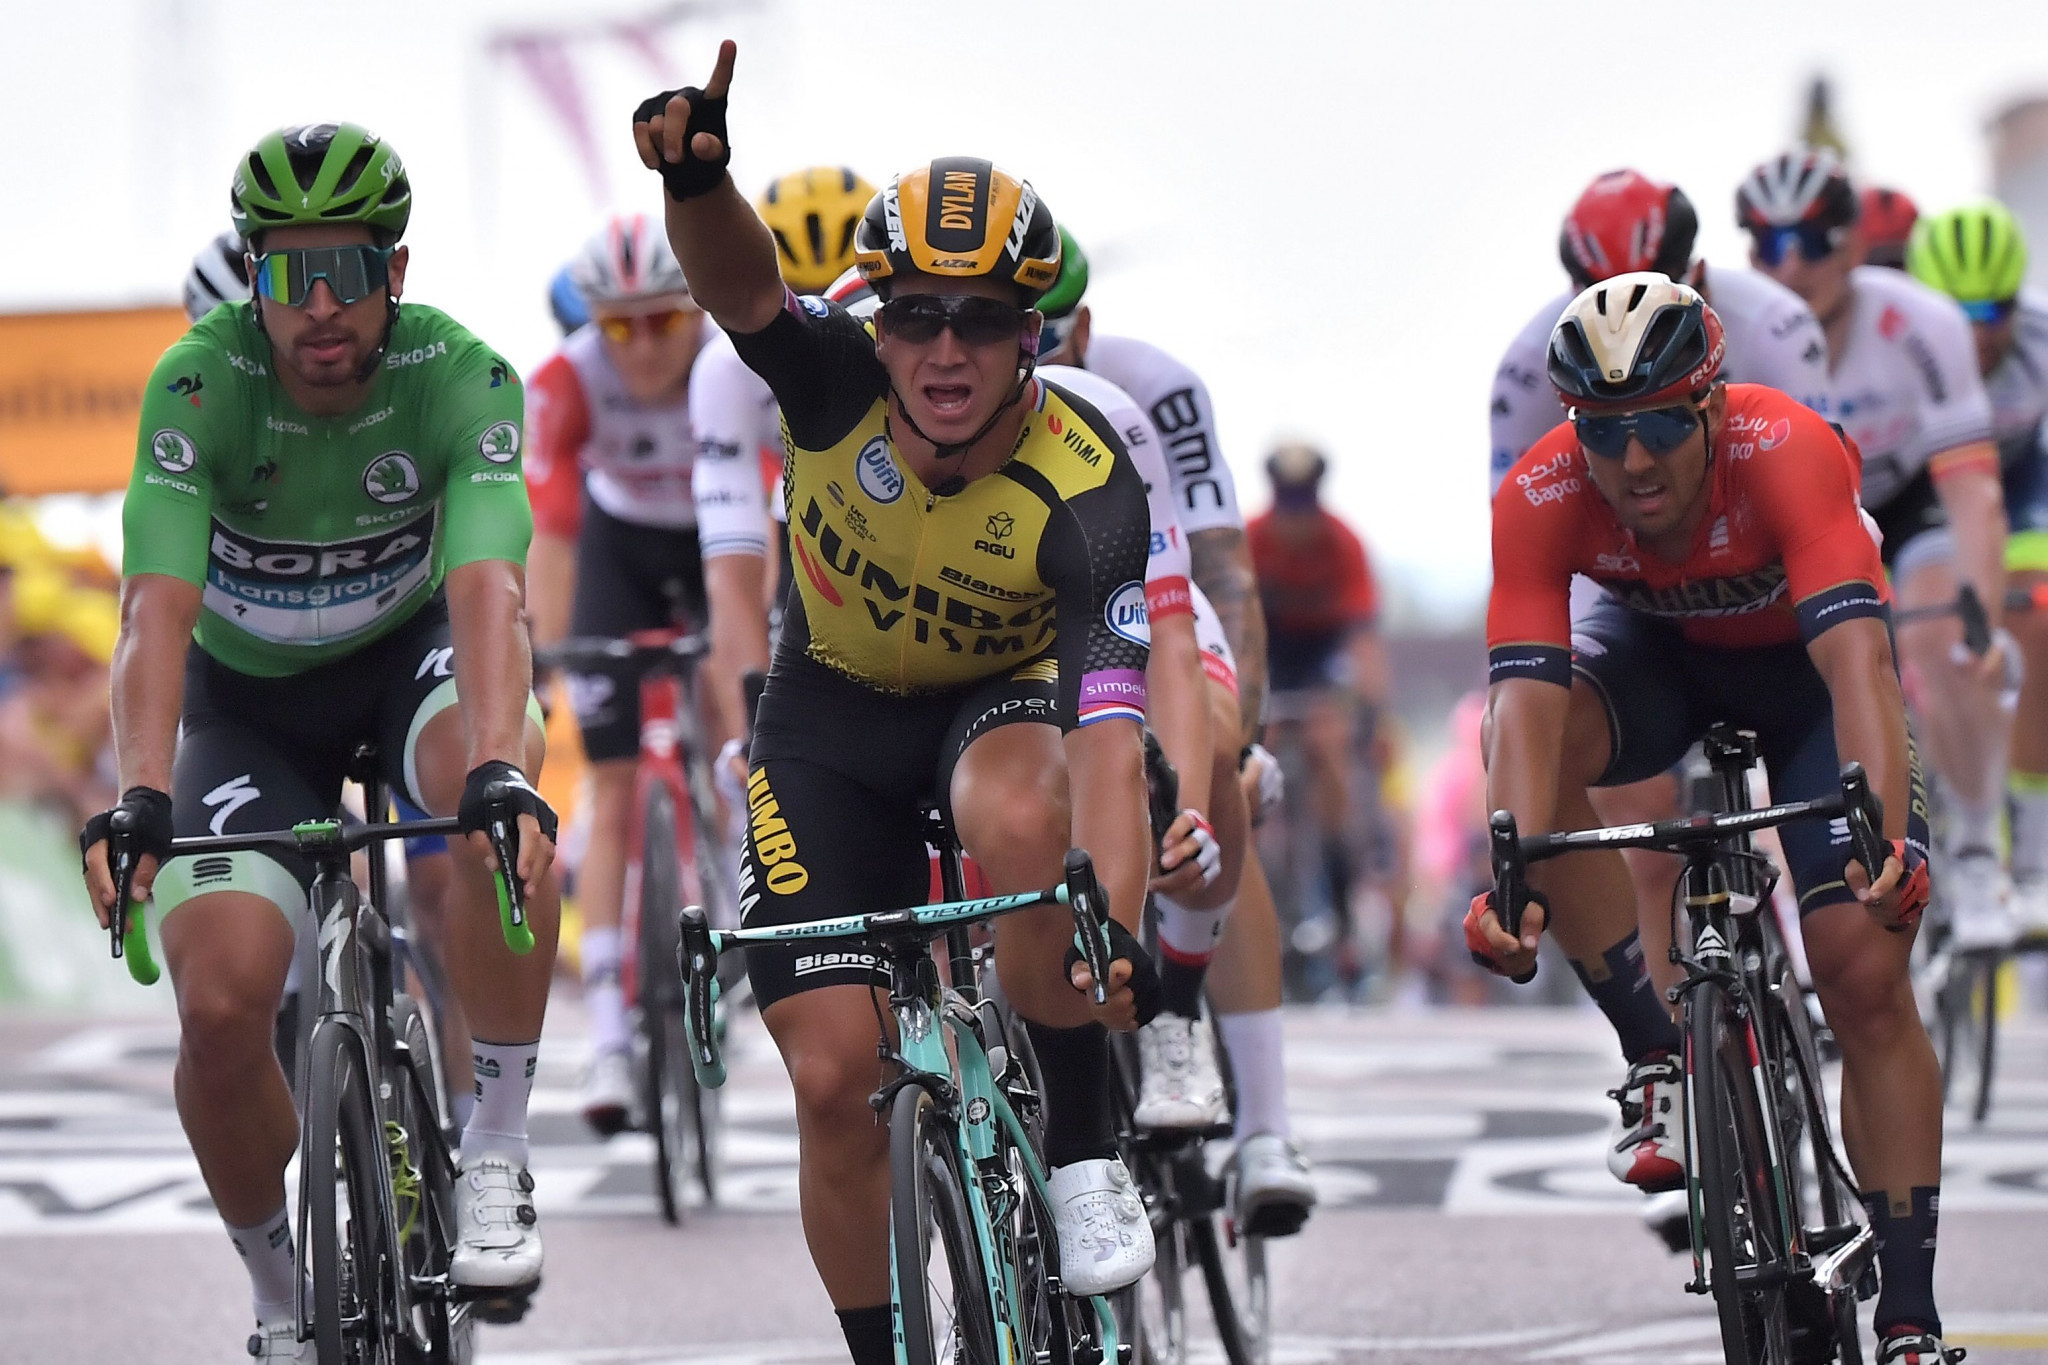 The Netherlands' Dylan Groenewegen won stage seven of the Tour de France after coming out on top in a dramatic sprint to the line ©Getty Images